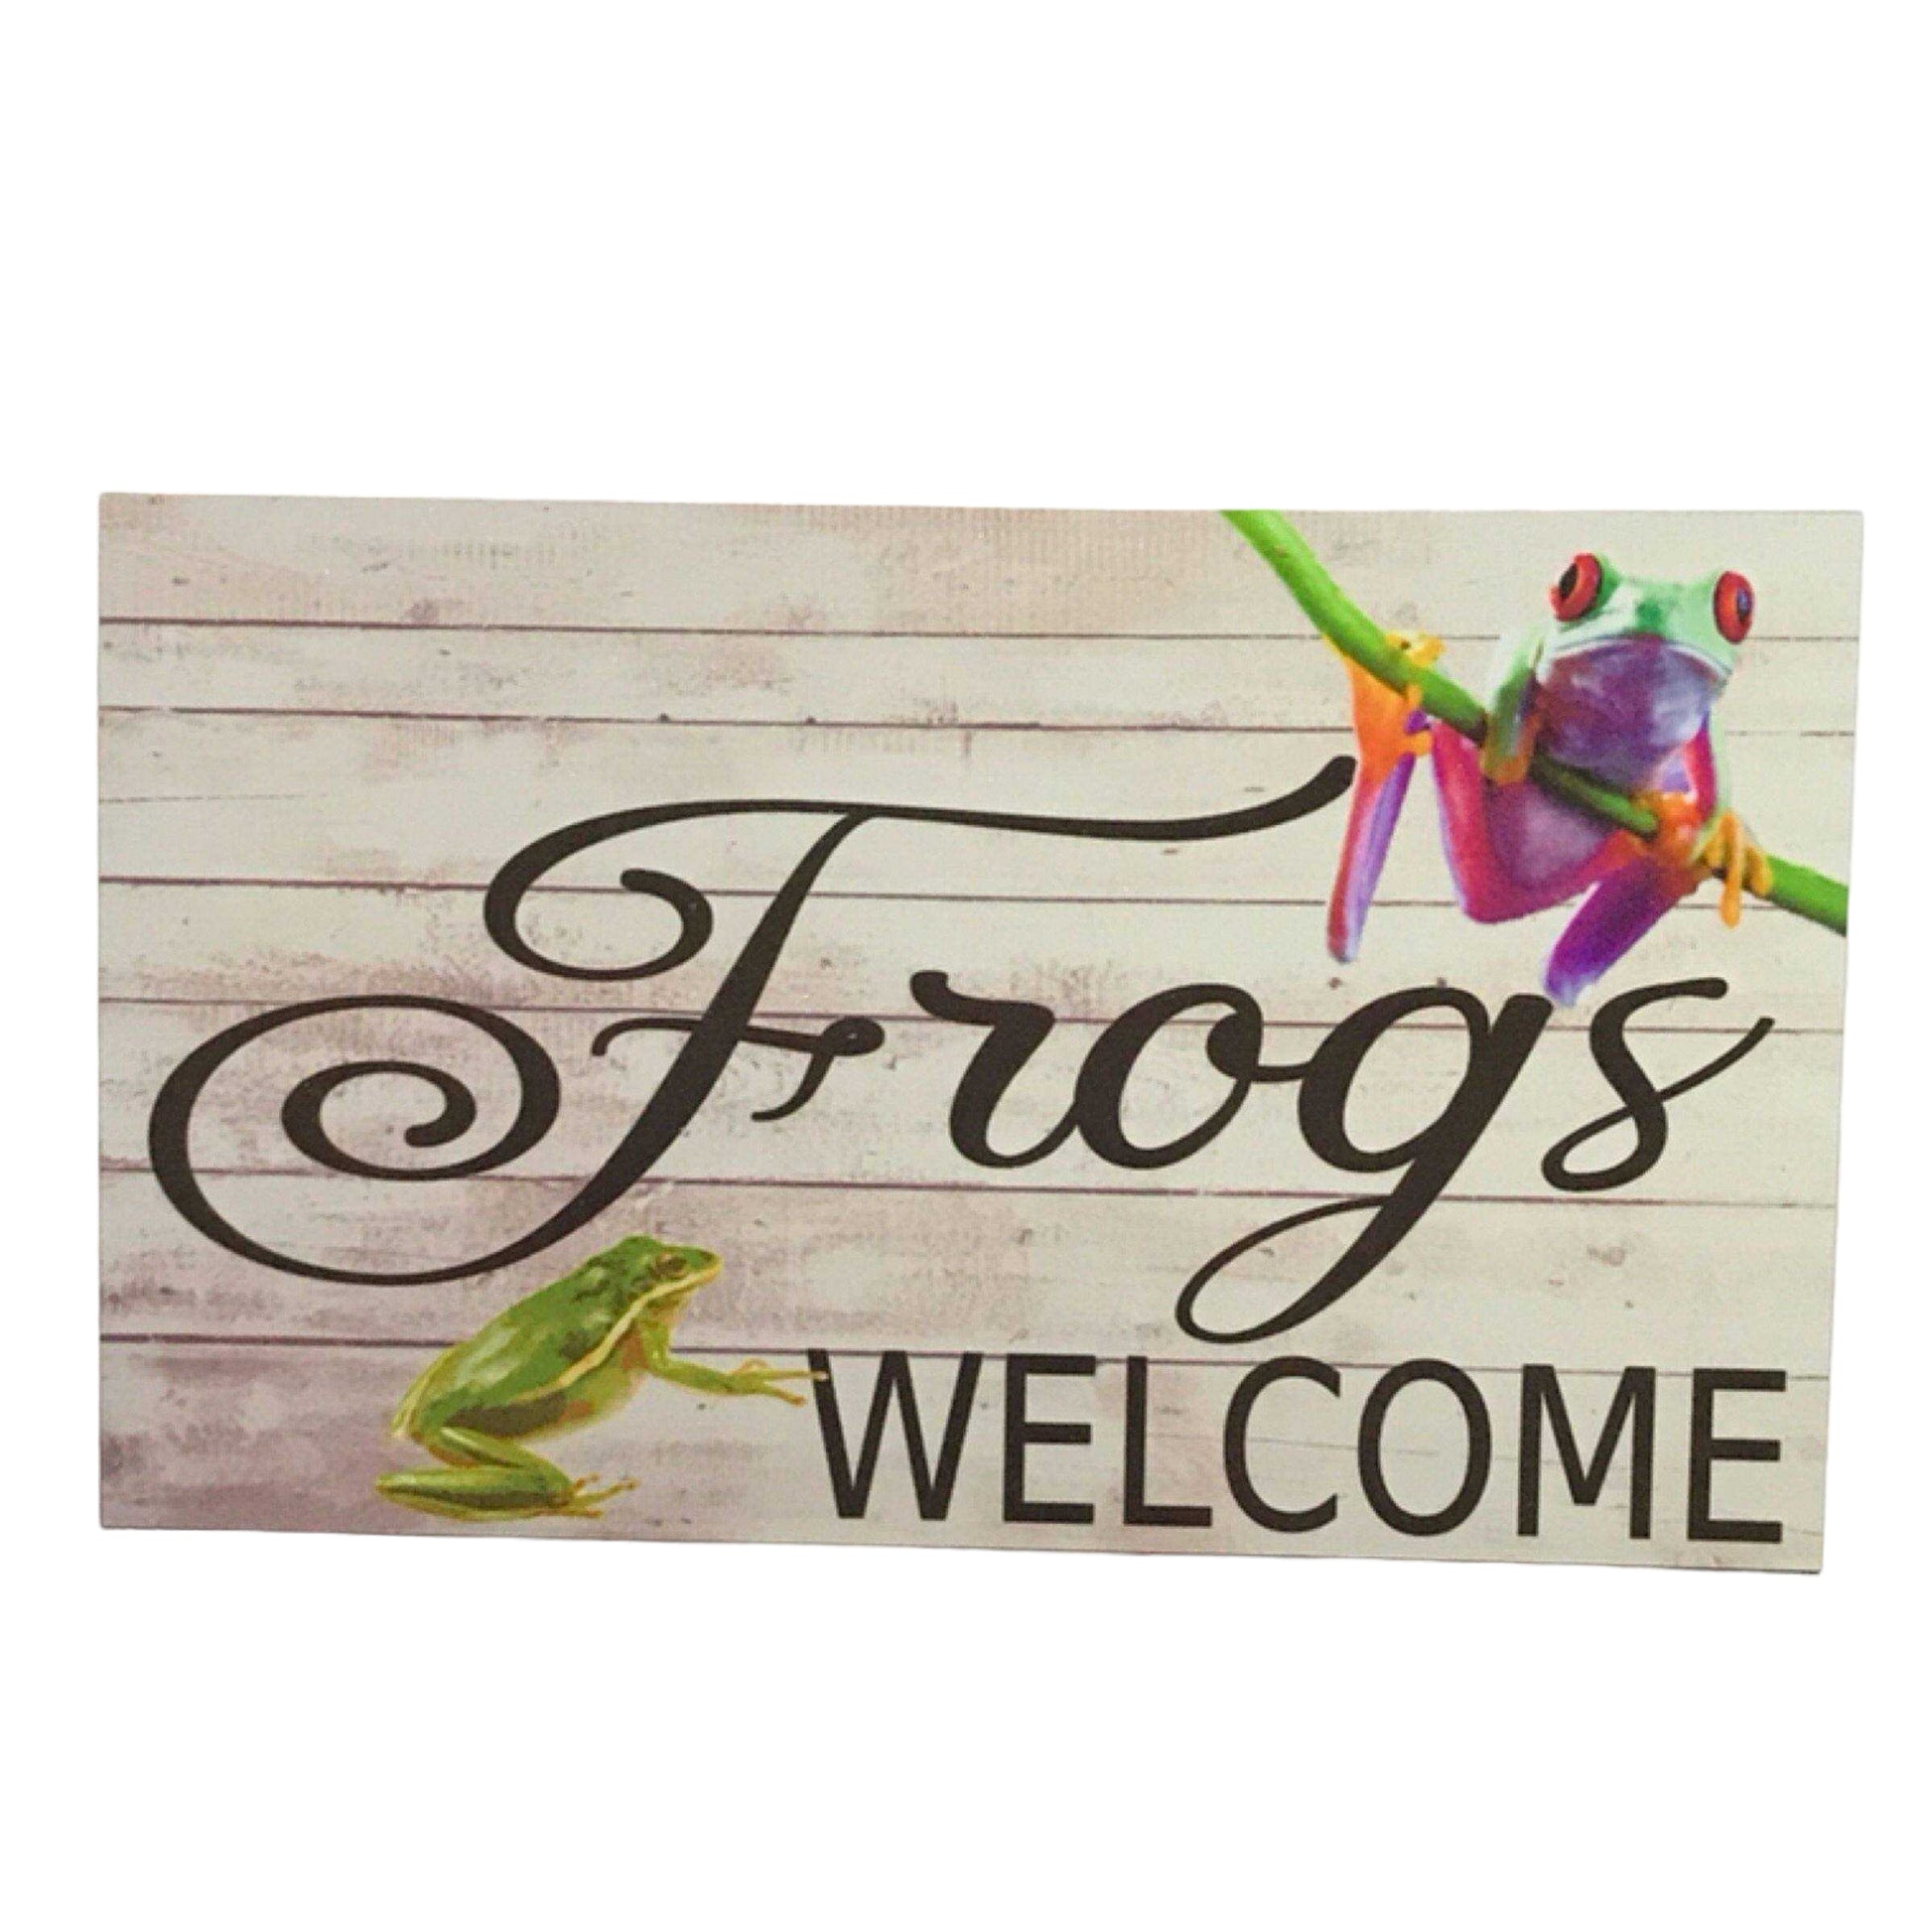 Frogs Welcome Sign - The Renmy Store Homewares & Gifts 